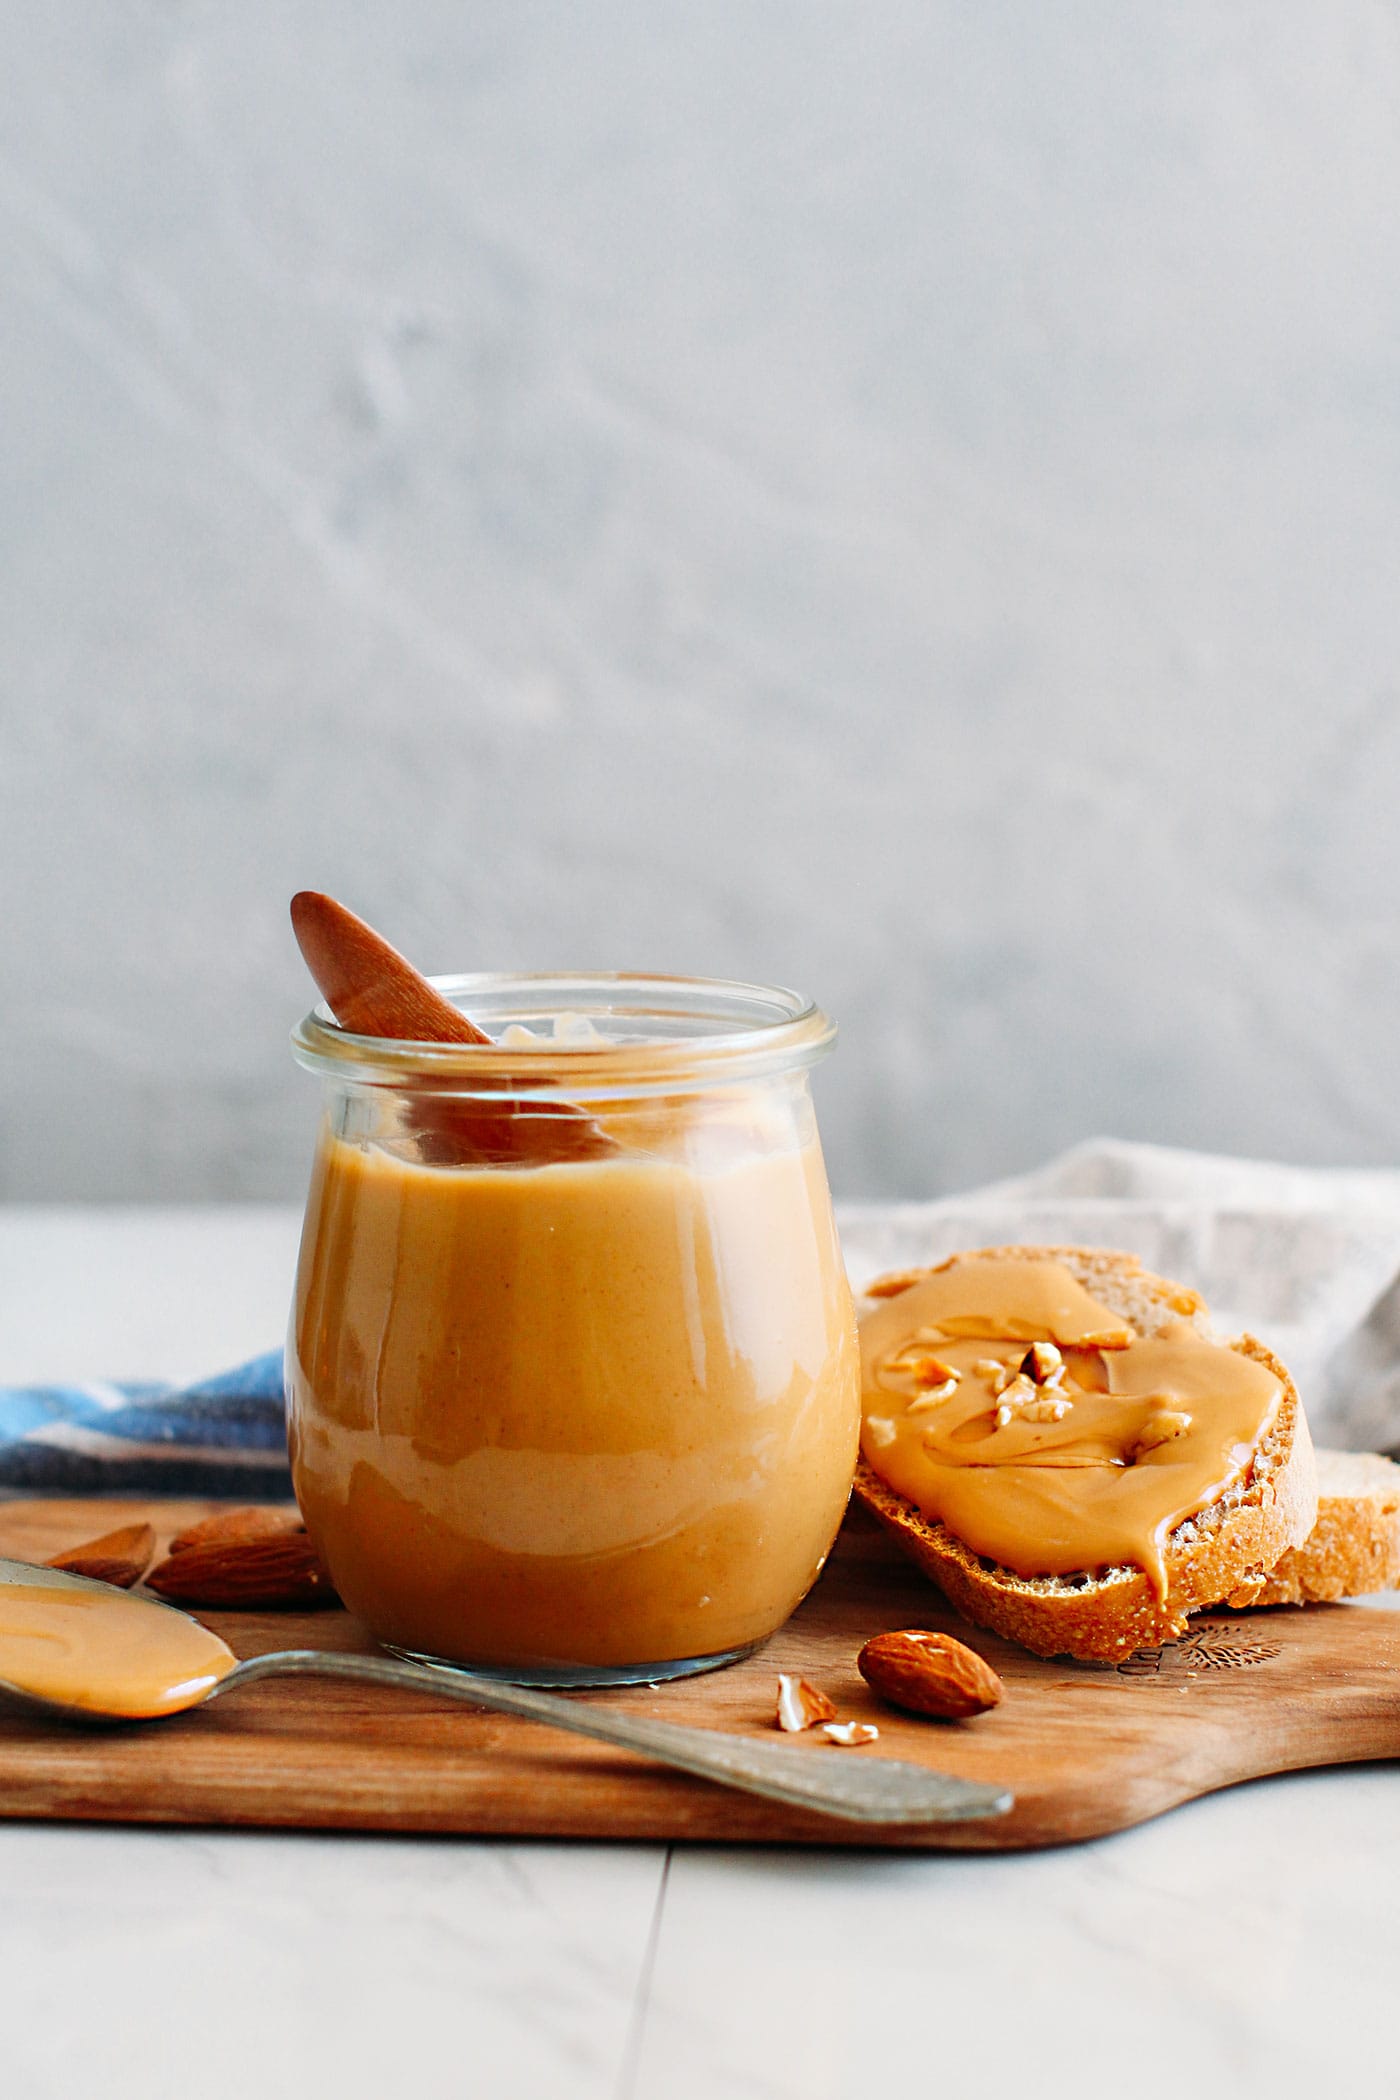 How to Make the Best Almond Butter